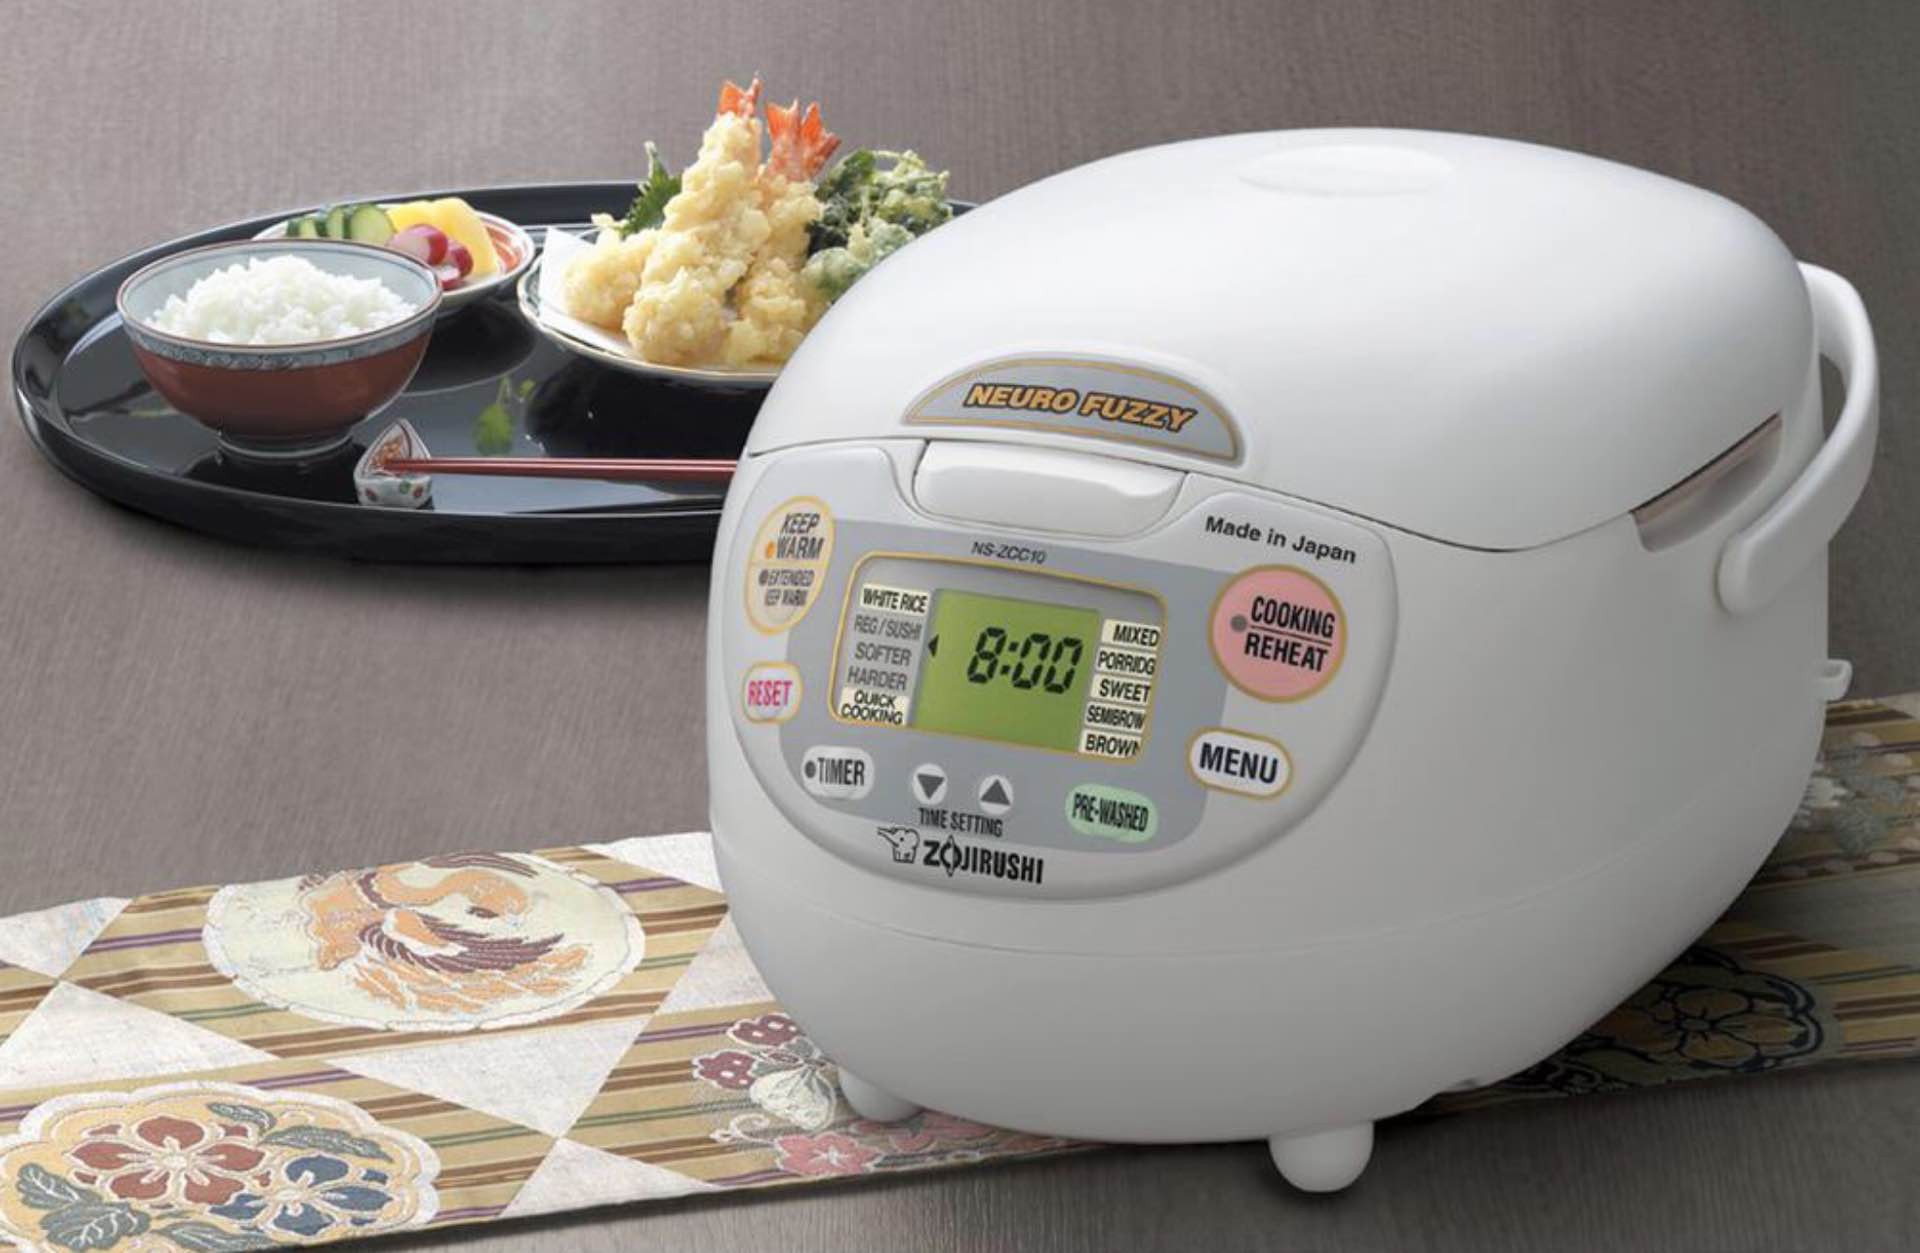 Zojirushi NS-ZCC10 rice cooker. ($161 or $191, depending on capacity)